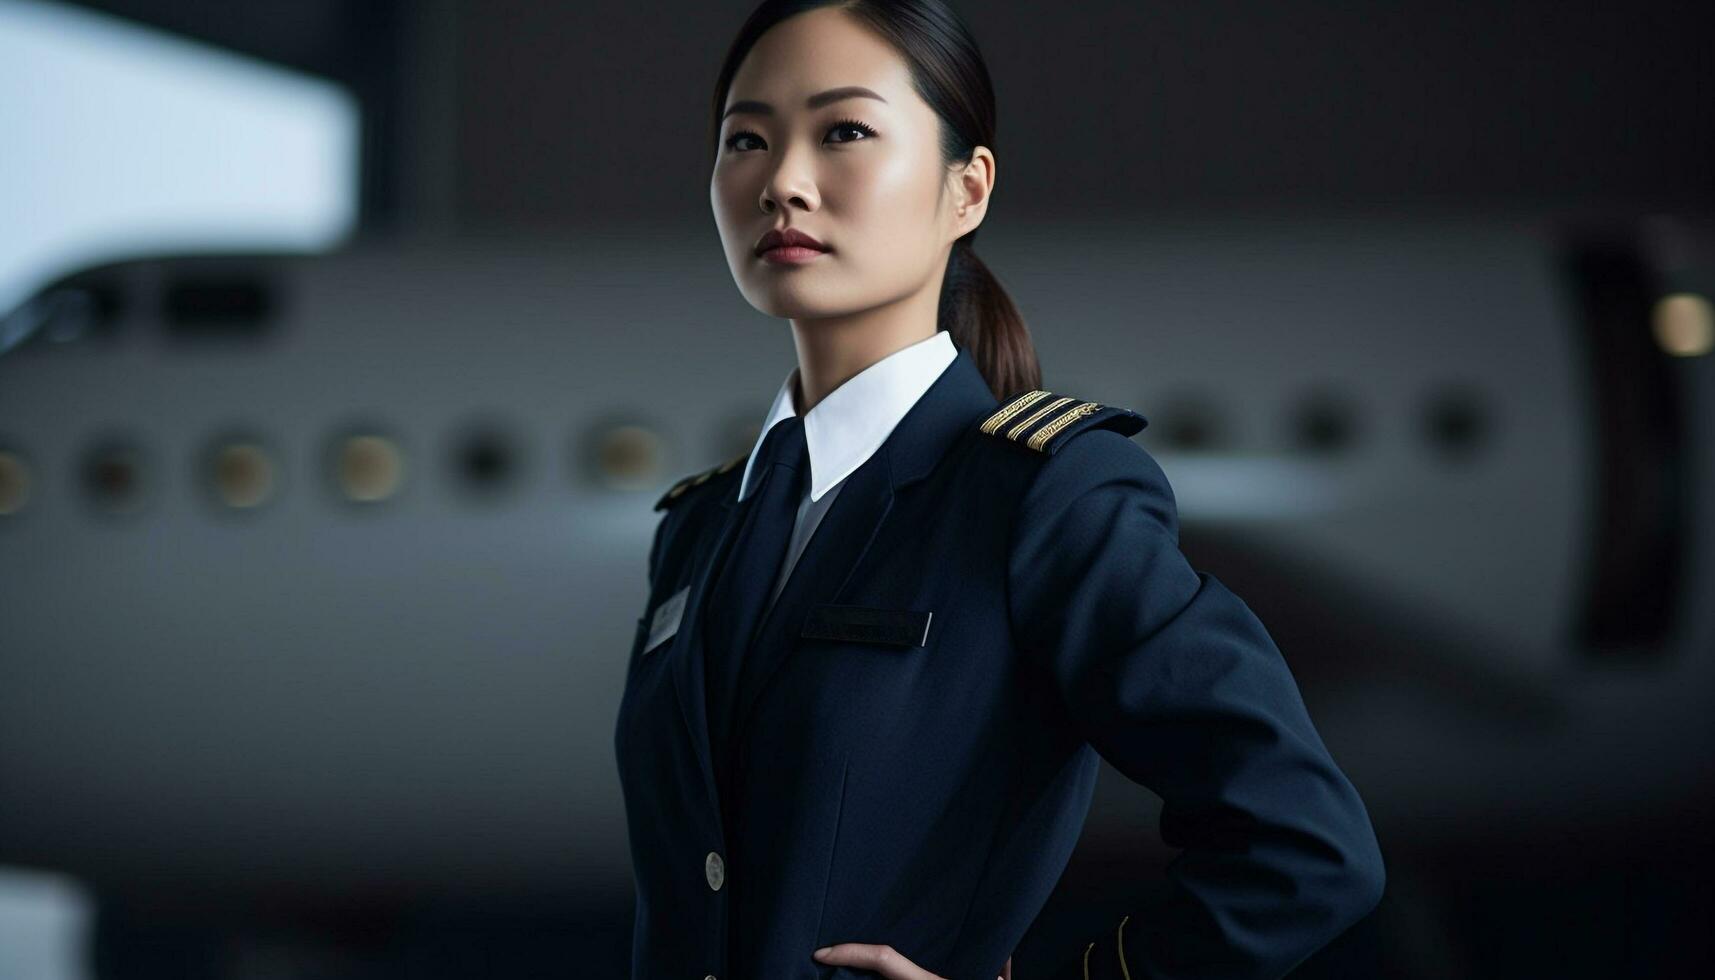 Confident young businesswoman in uniform standing in front of airplane generated by AI photo